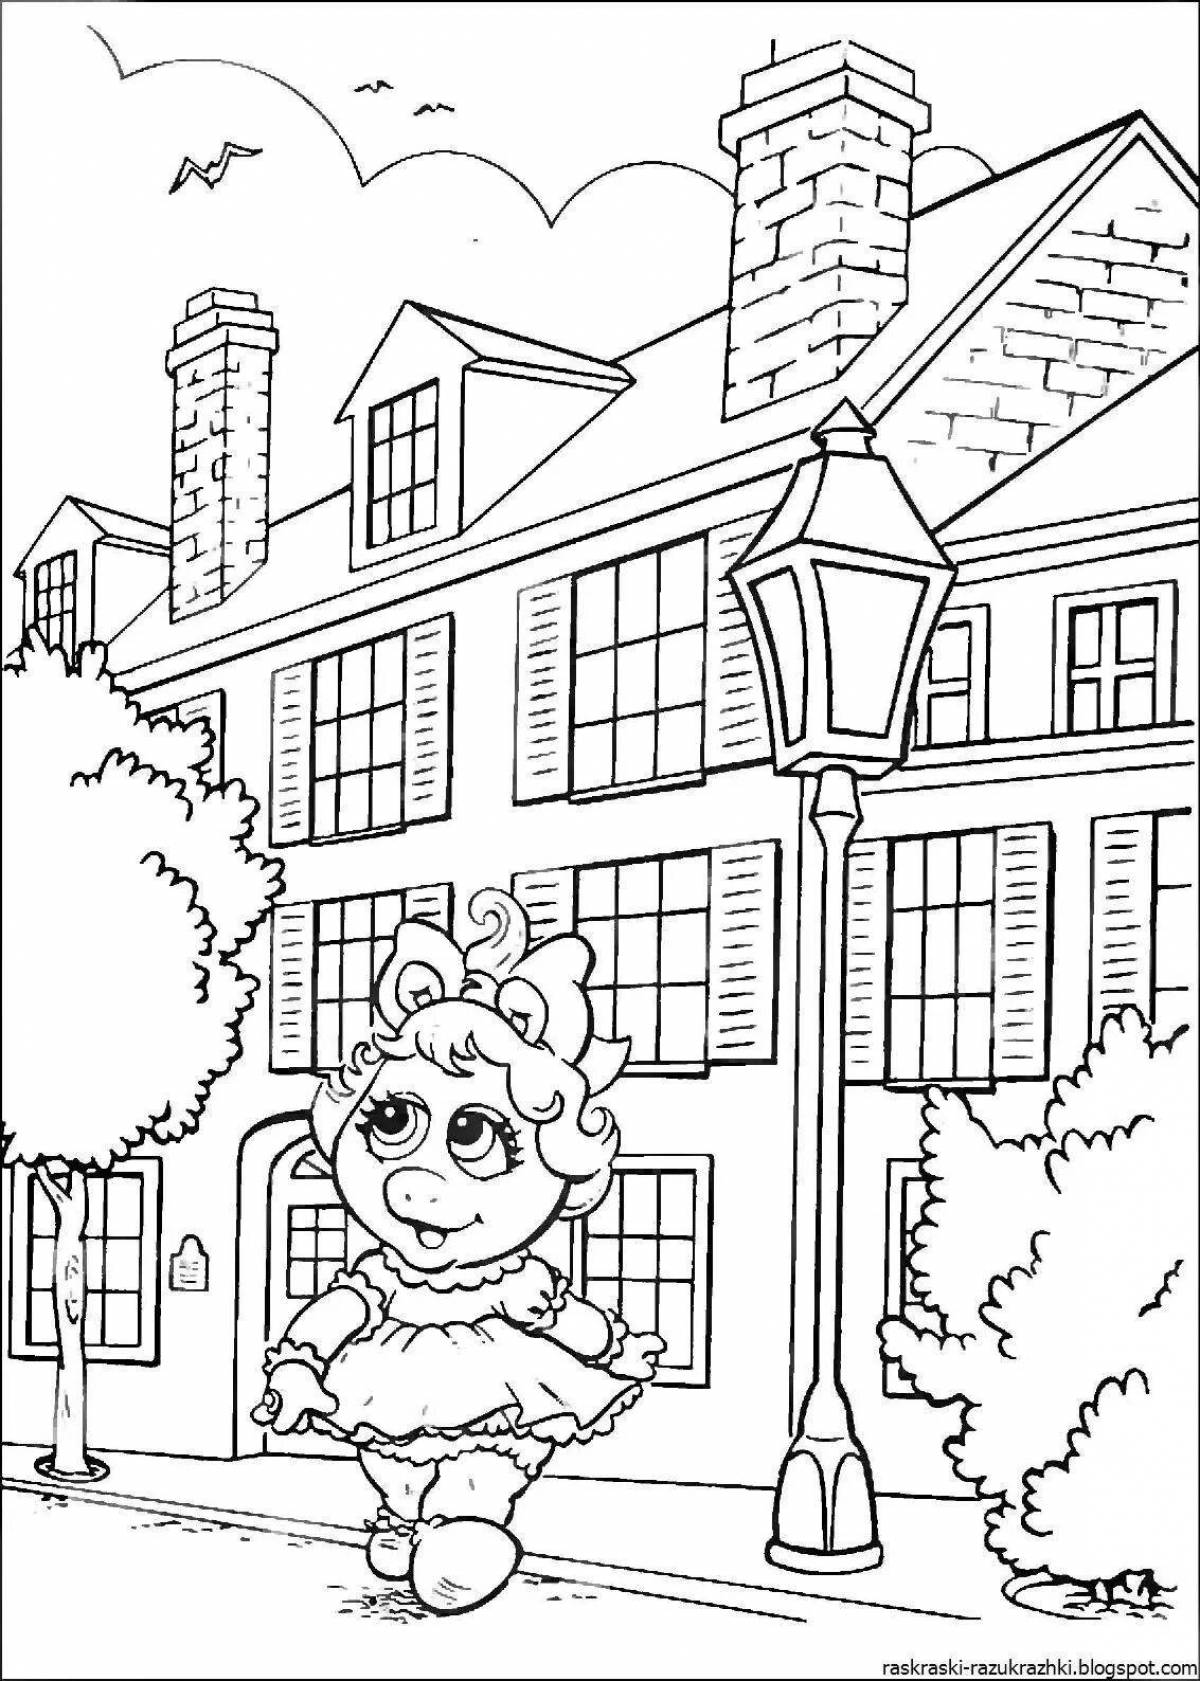 A fun street coloring book for kids